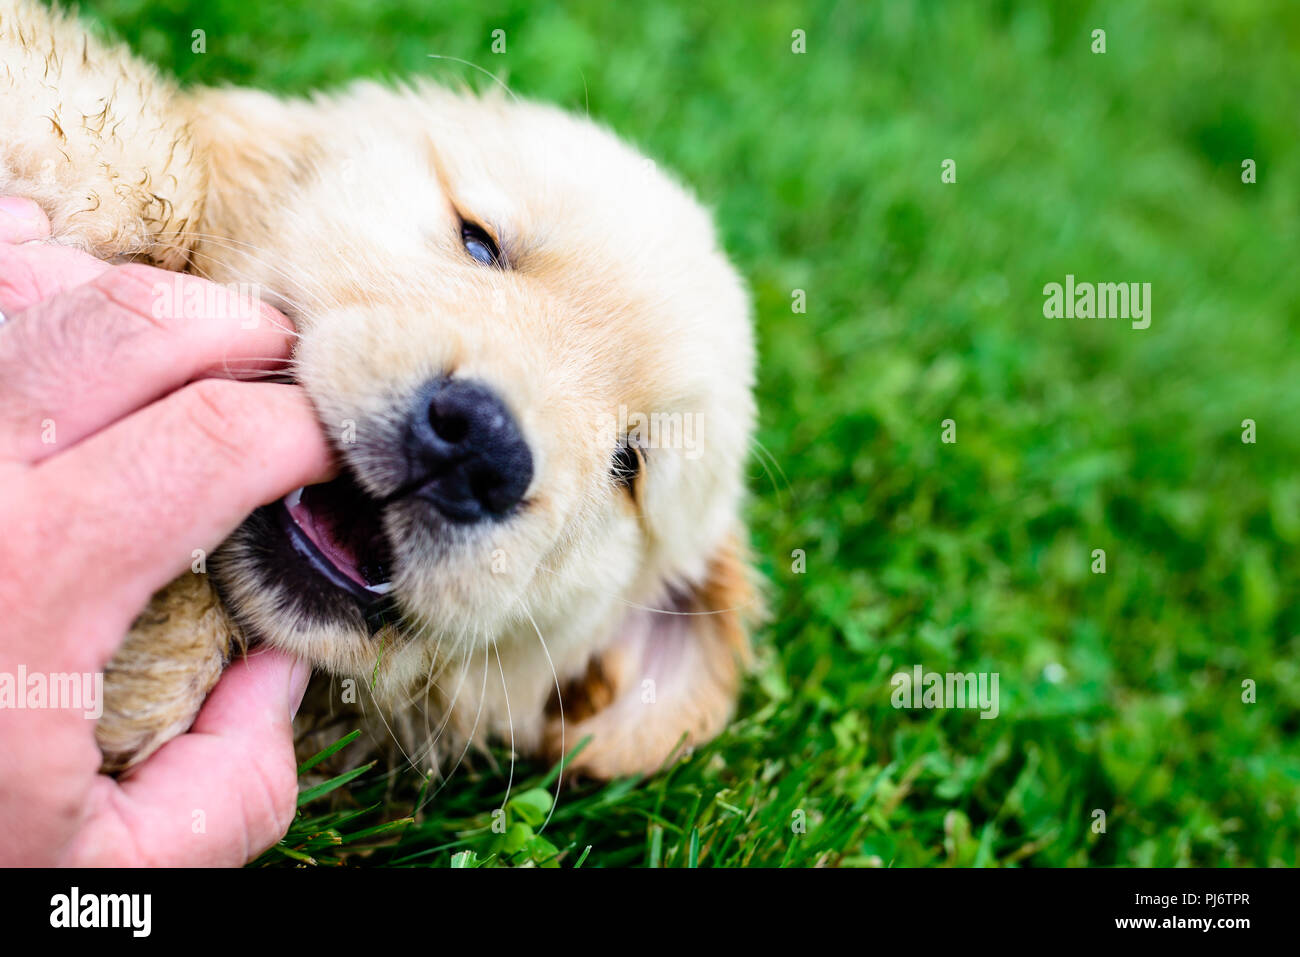 Falmouth Maine Eight Week Old Golden Retriever Puppies At Poeticgold Farm In Falmouth Maine On June 7 2018 Credit Benjamin Ginsberg Stock Photo Alamy